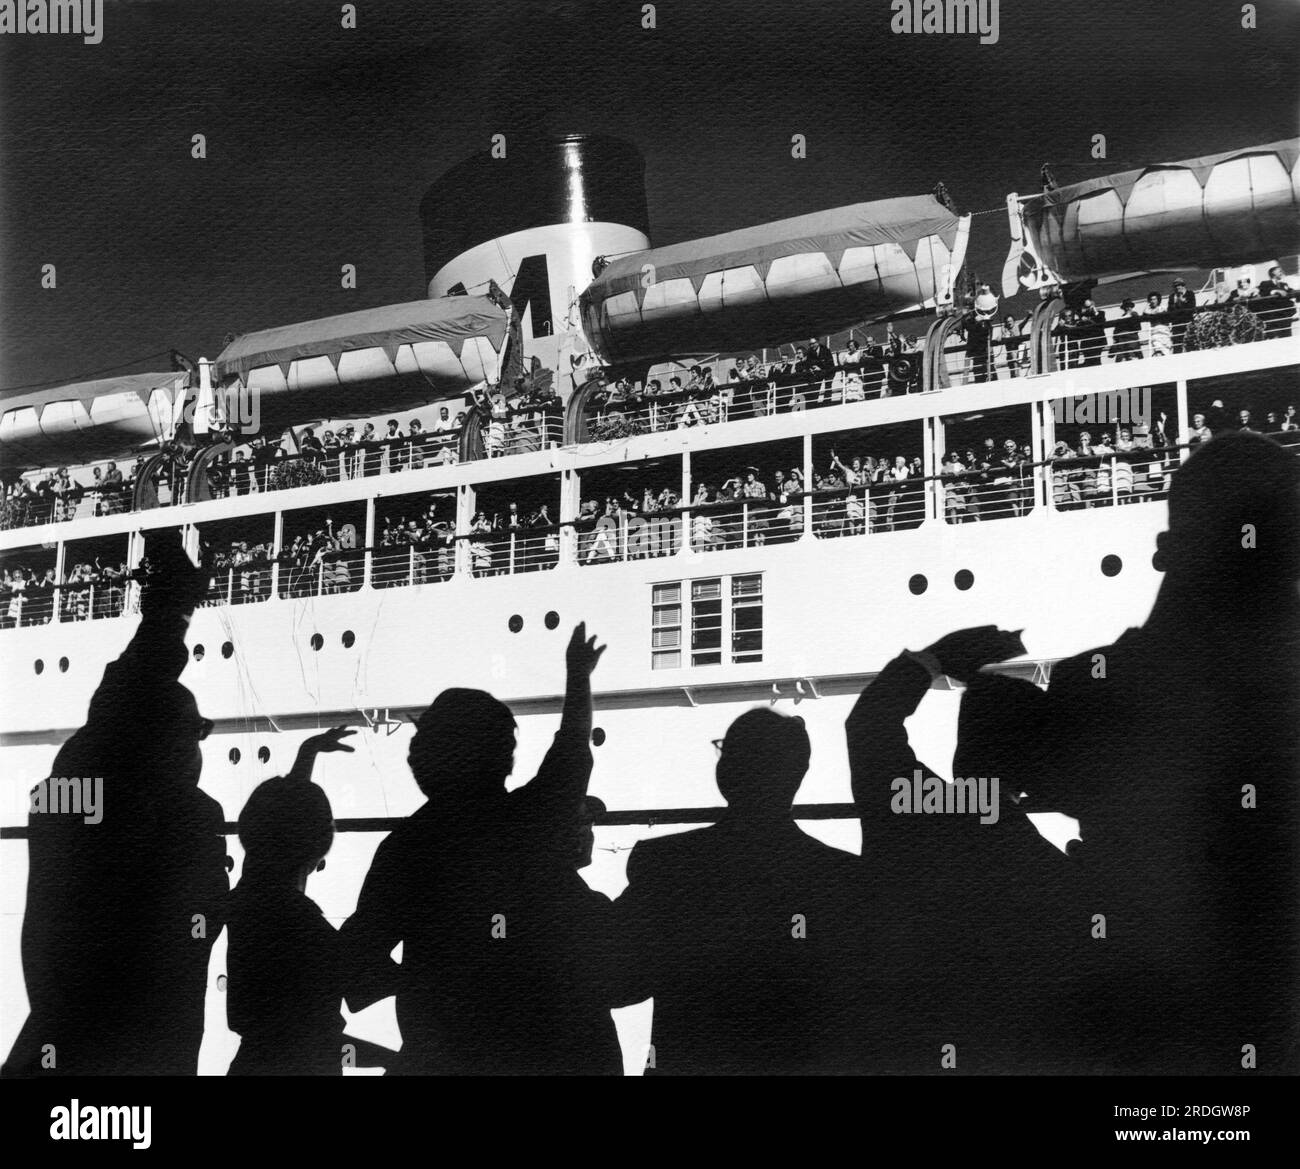 San Francisco, California:  c. 1955. People on the docks wave 'bon voyage' to friends and family departing on a Matson Liner. Stock Photo